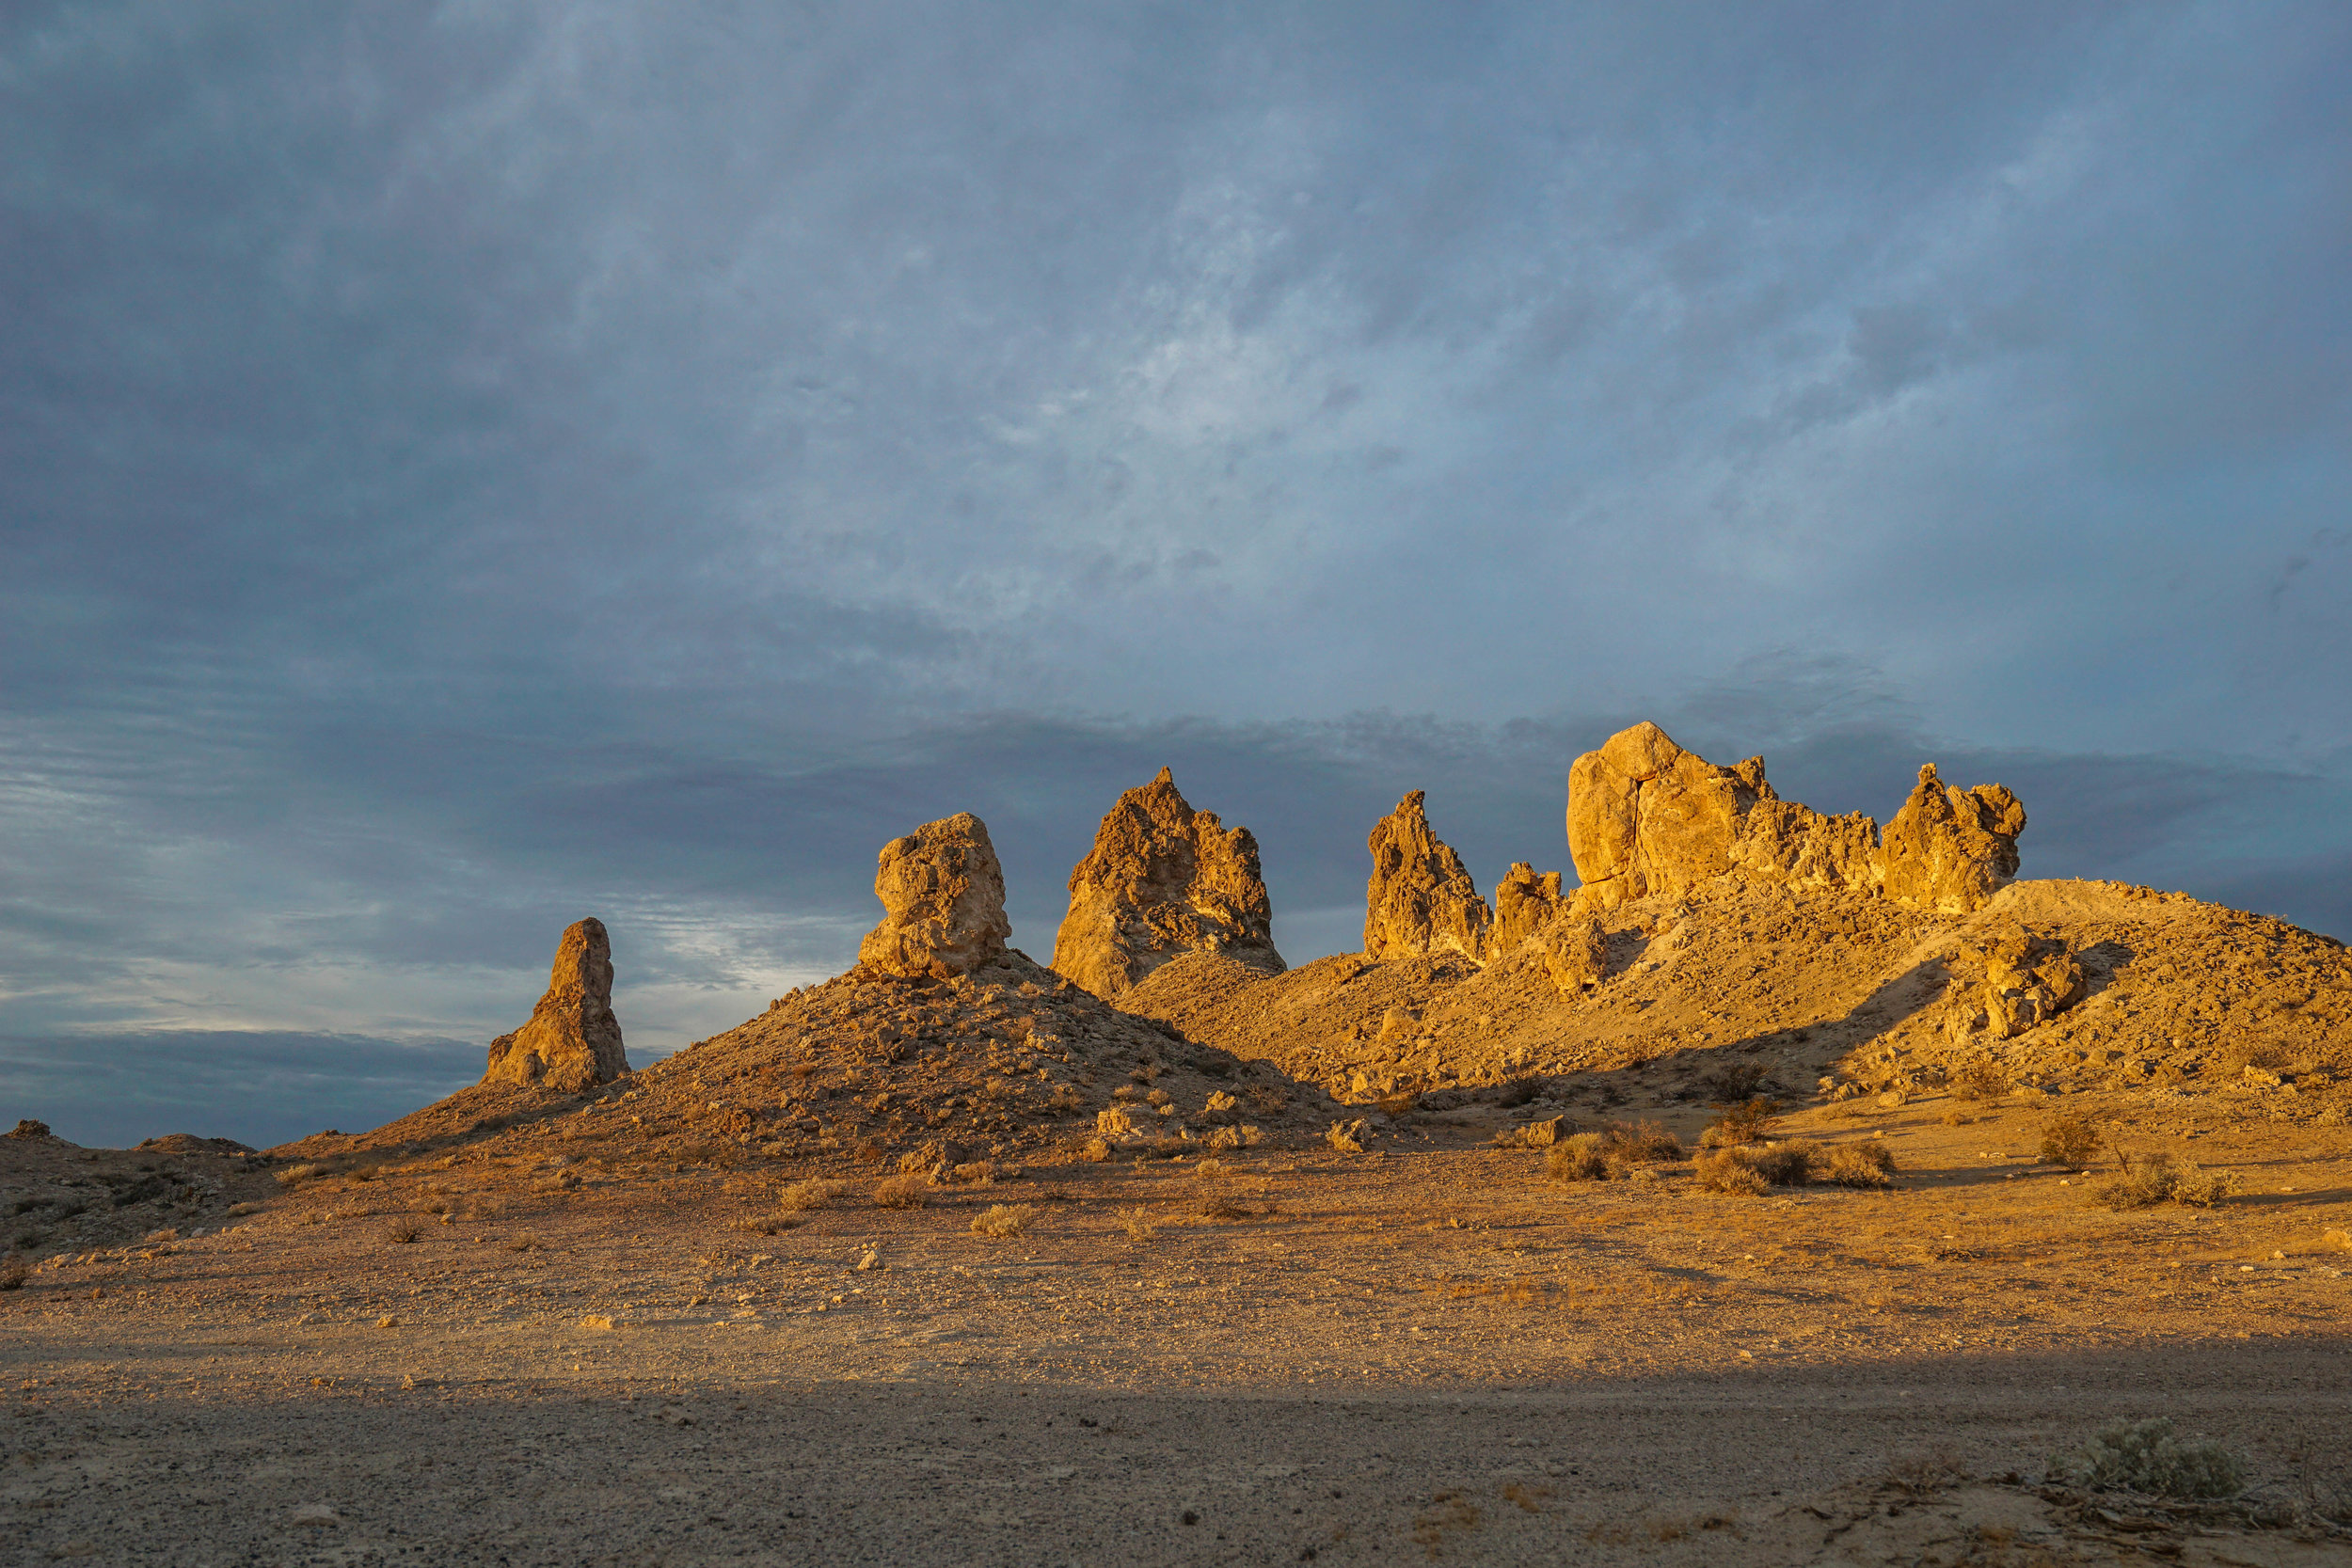 These magnificent pinnacles vary in age from 10,000 to 100,000 years according to current measurements. They were not formed all at once. It is said they were created during 3 separate ice ages.